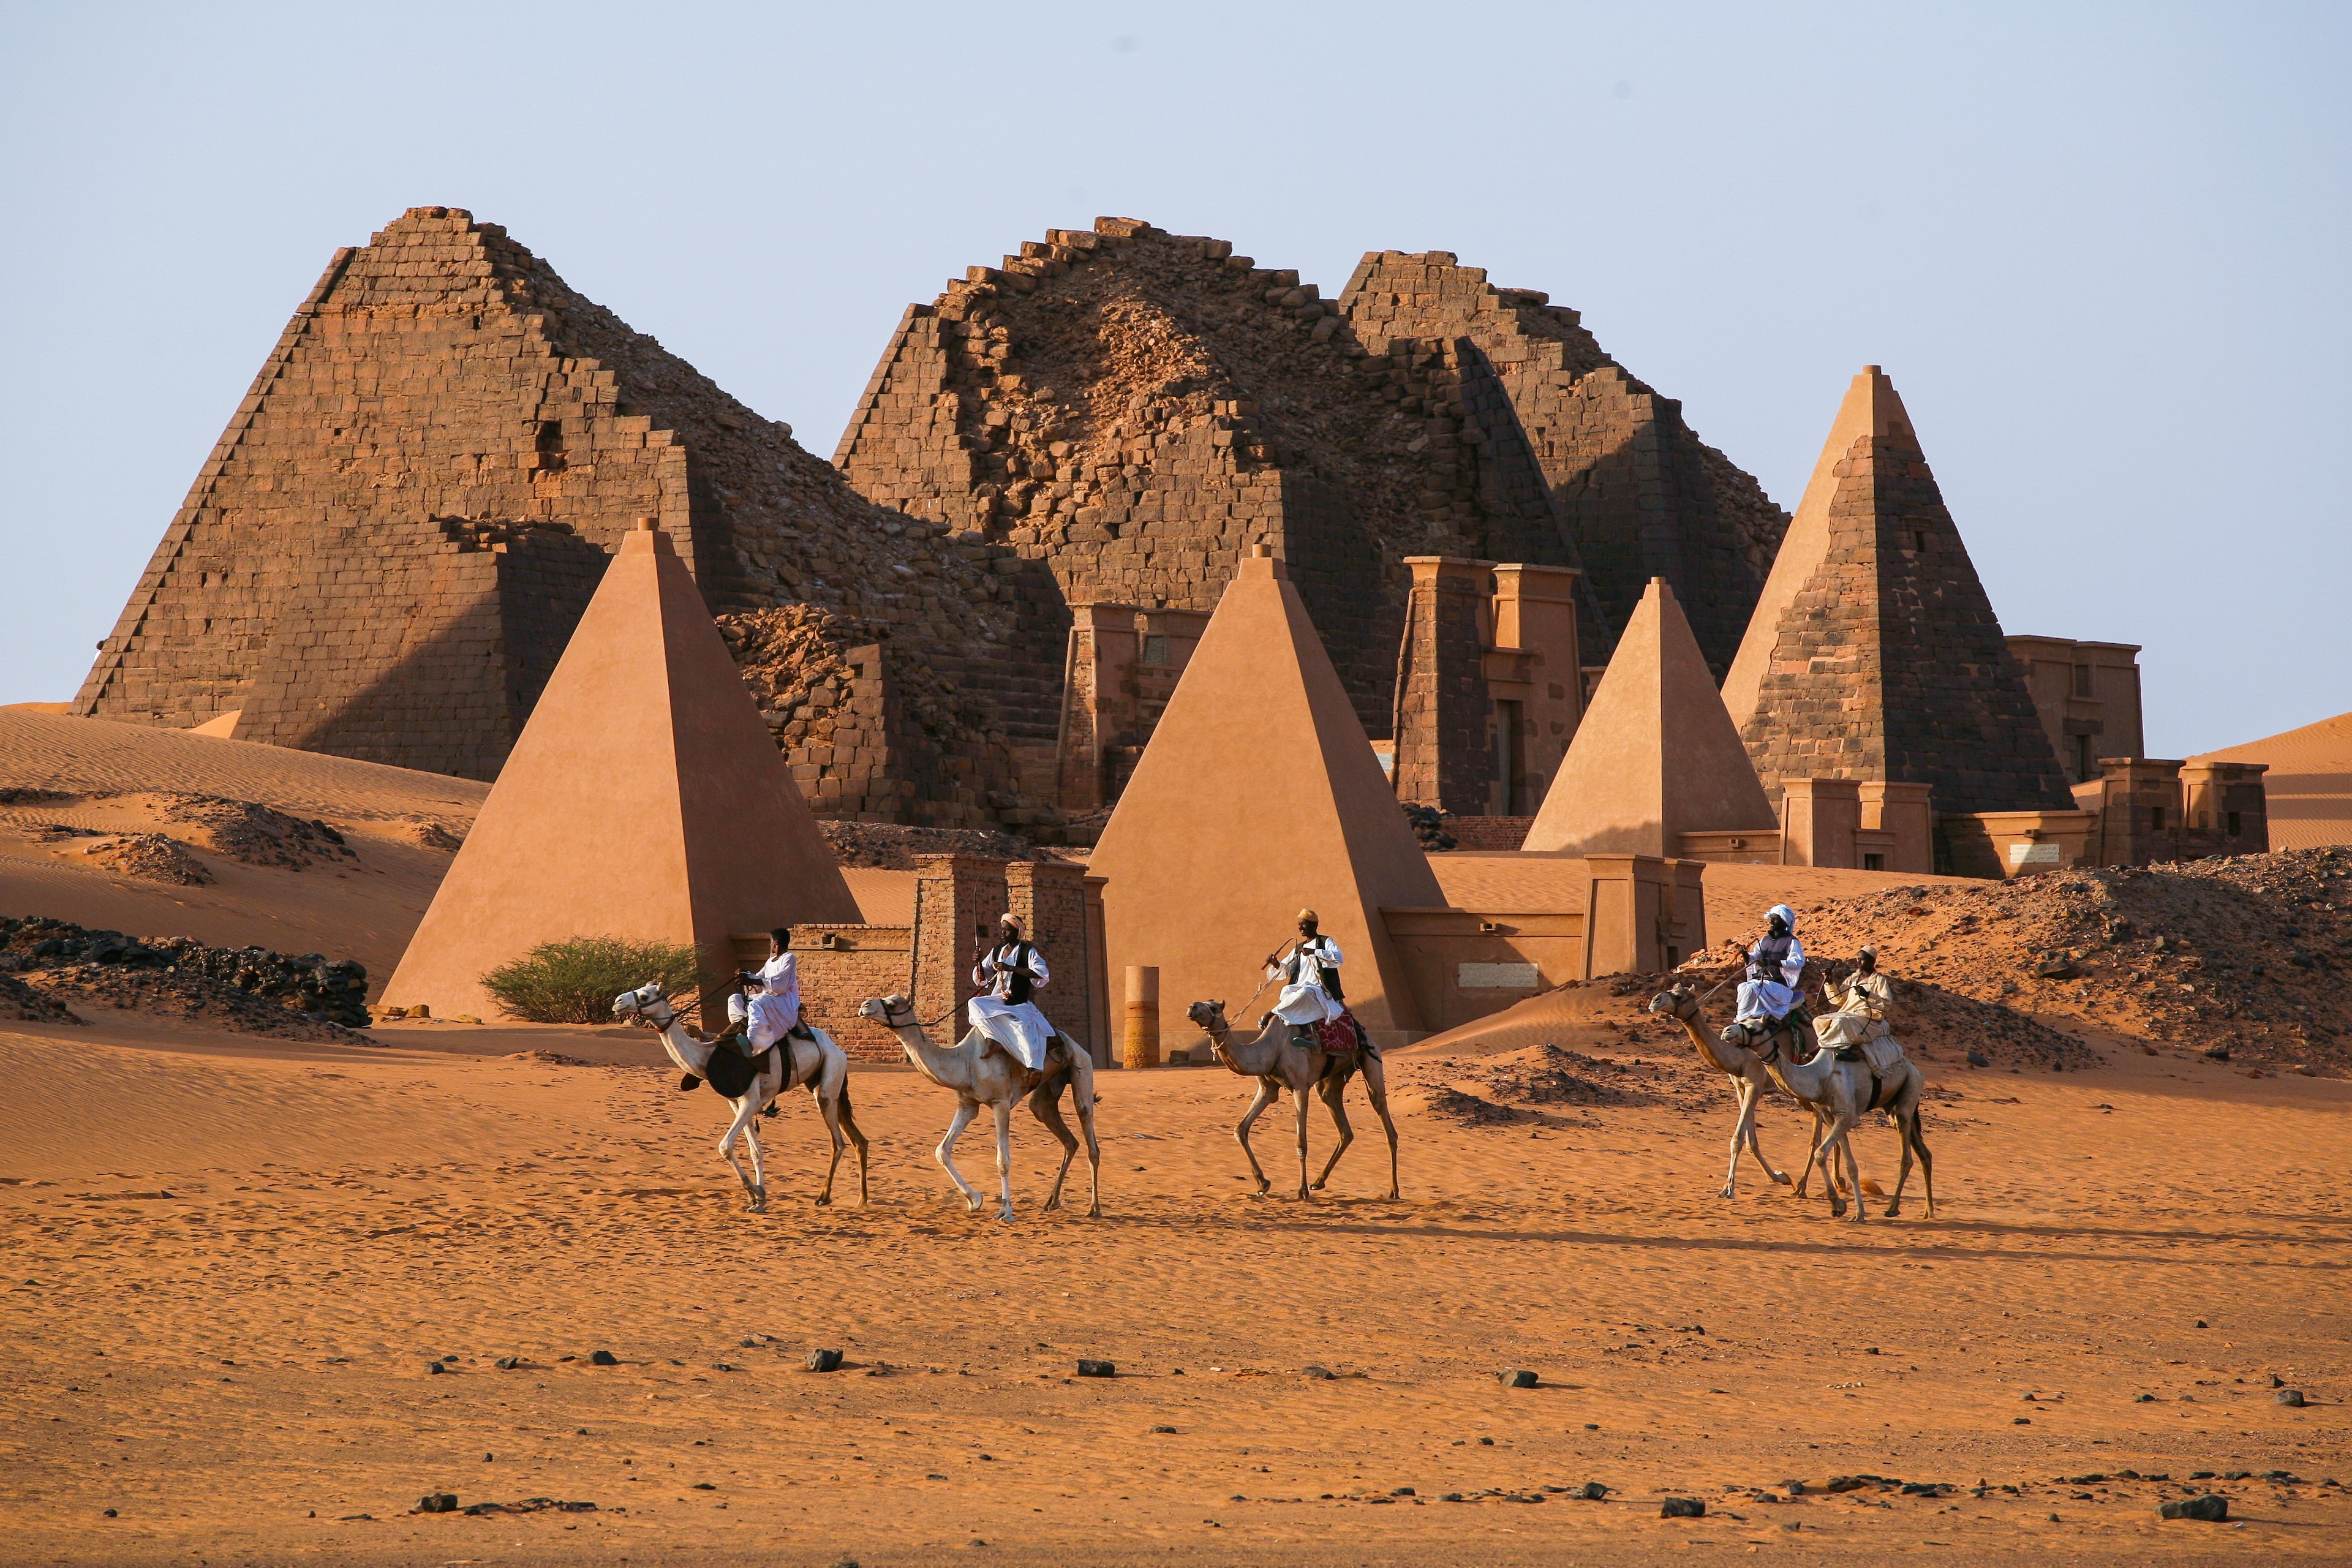 Which country has the most pyramids in the world?